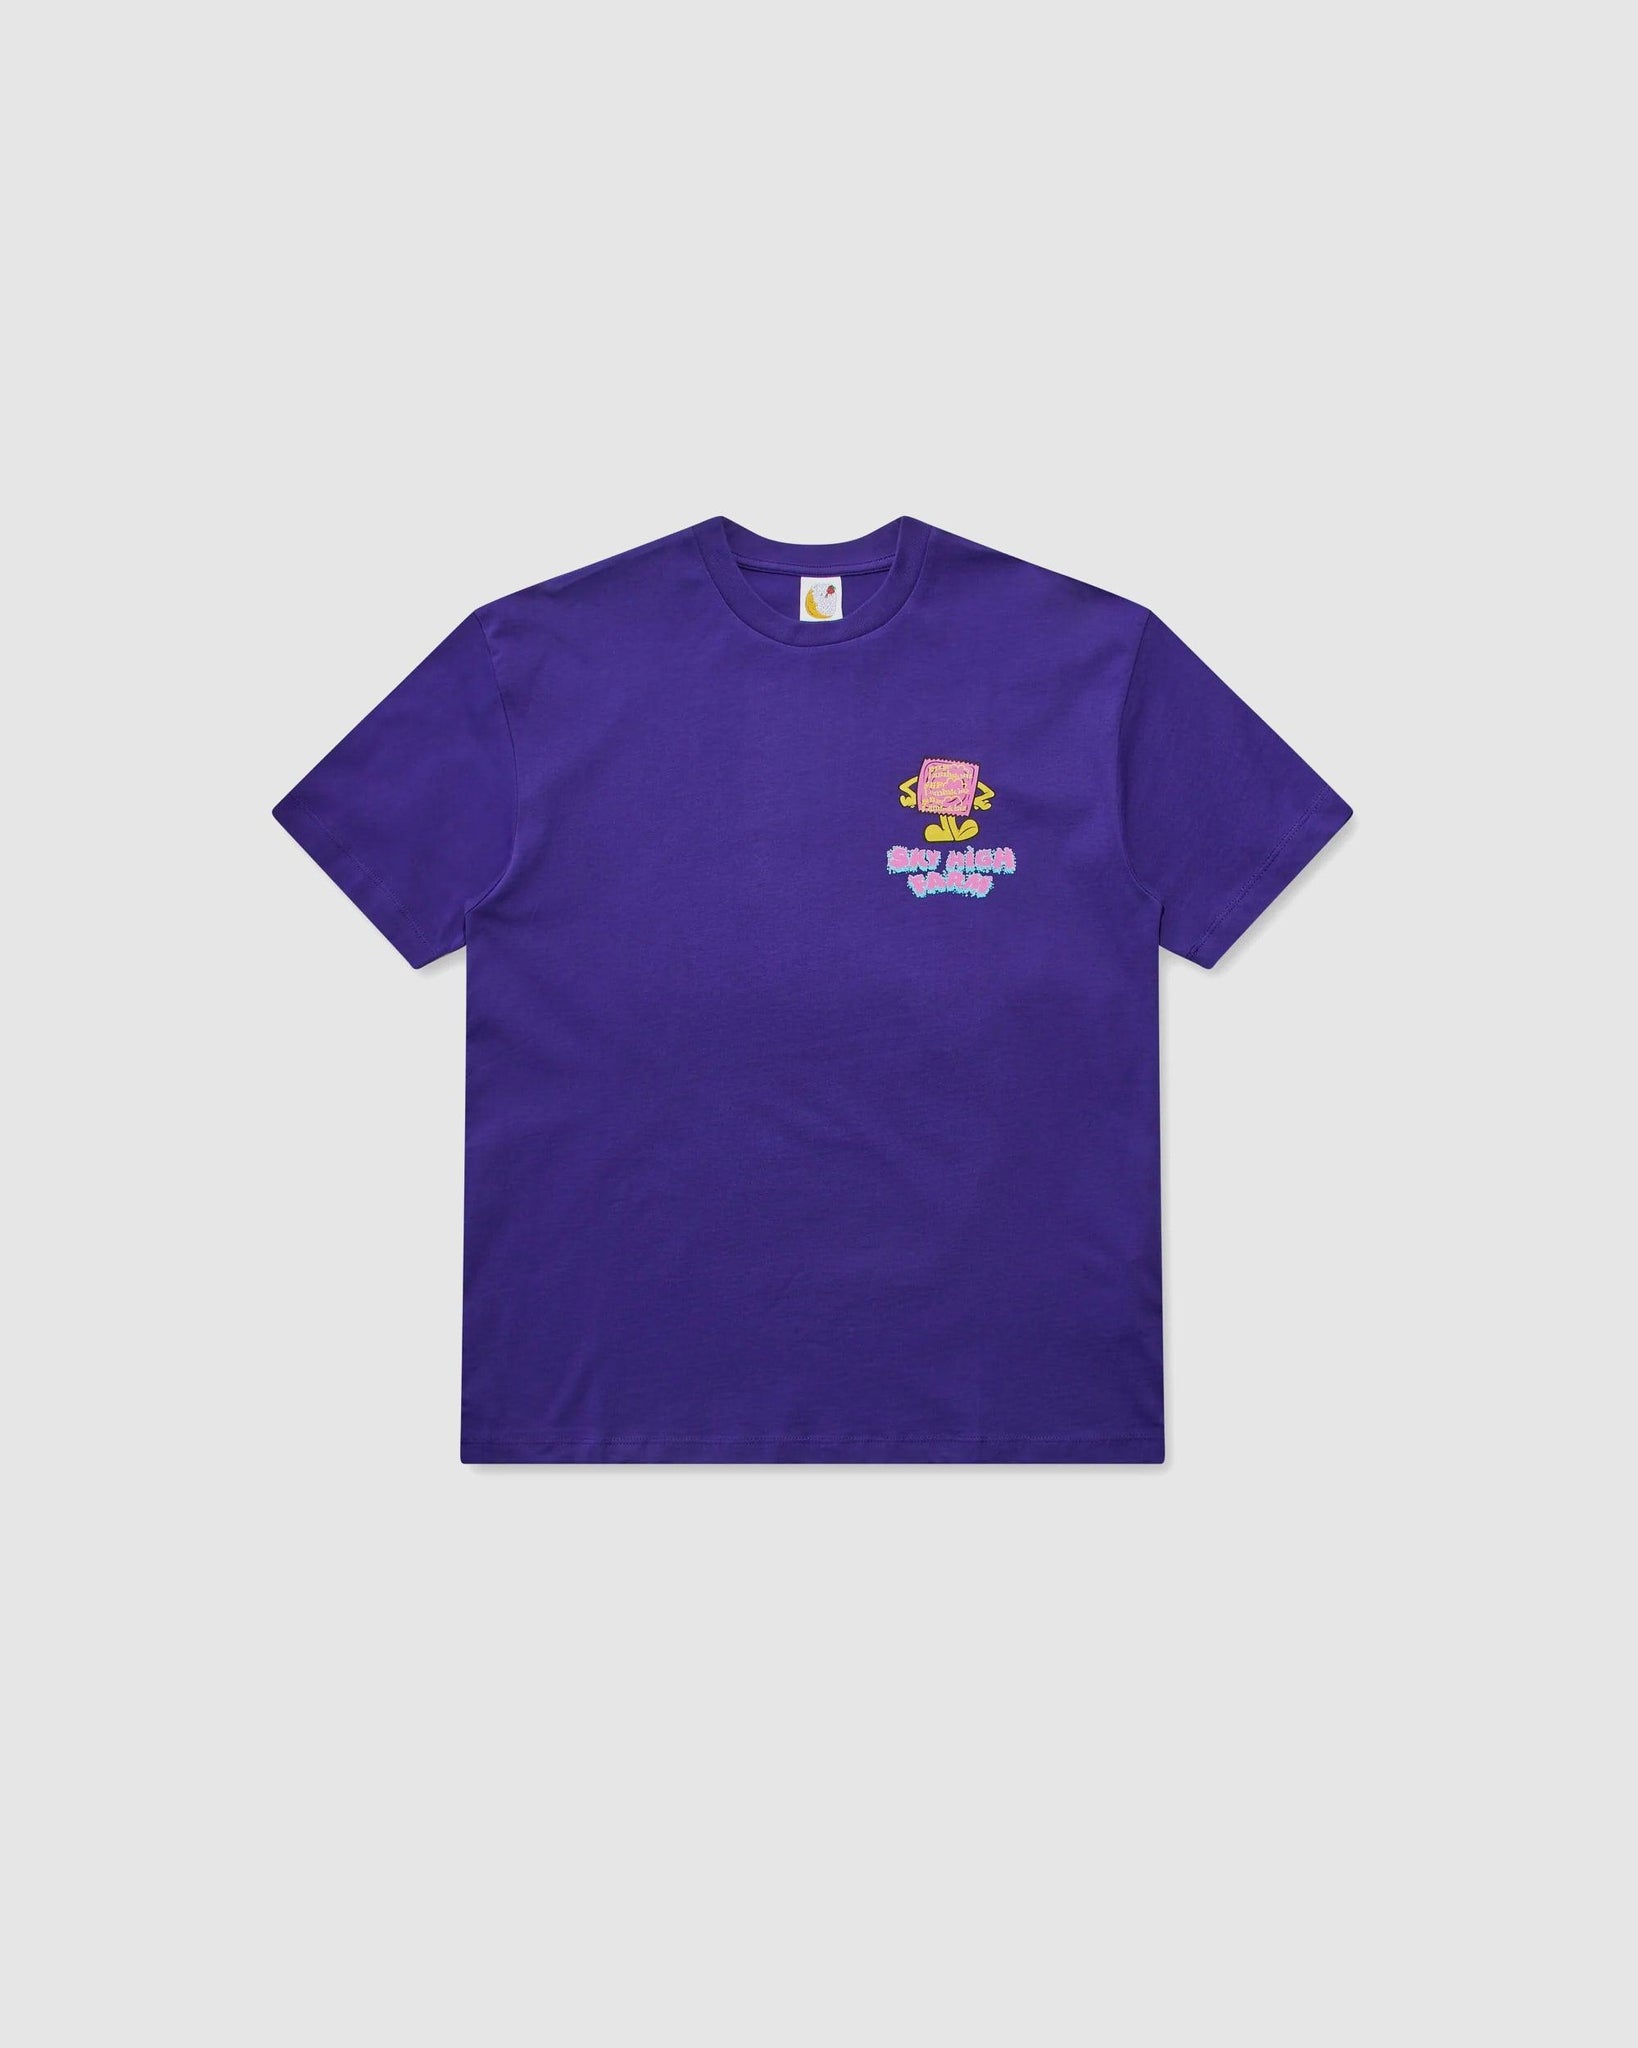 Flatbush Printed T Shirt Purple - {{ collection.title }} - Chinatown Country Club 